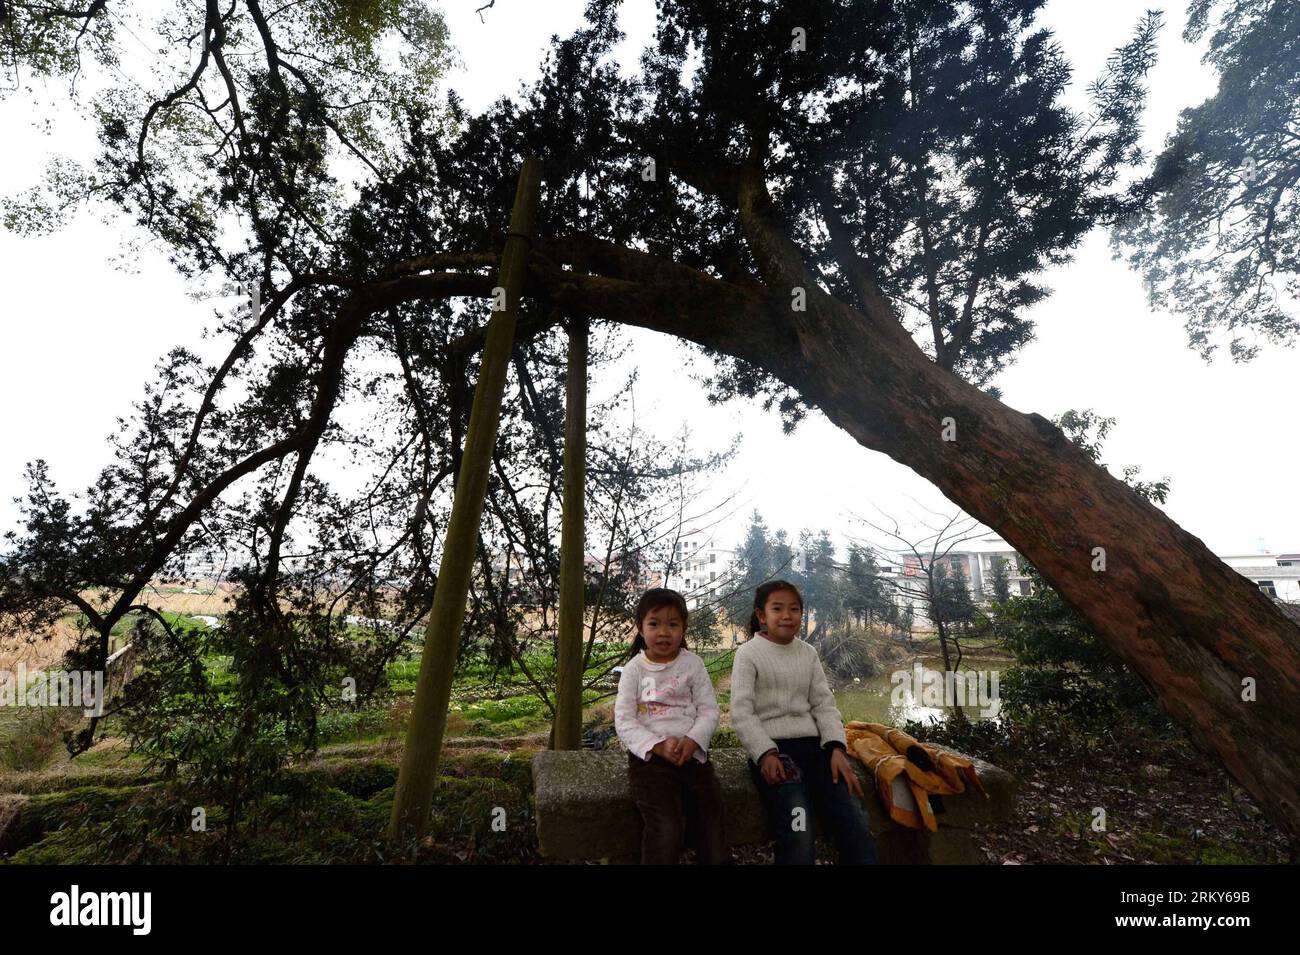 Bildnummer: 59155618  Datum: 30.01.2013  Copyright: imago/Xinhua YIFENG, Jan. 30, 2013 -  Two children sit under an old podocarpus tree in Fuxi Village in Yifeng County, east China s Jiangxi Province, Jan. 30, 2013. The old tree corridor consisting of over 100 ancient trees was established in the early Song Dynasty (960-1279) in the village and was well-conserved until now. Some of the trees aged more than 1,000 years. (Xinhua/Song Zhenping) (zc) CHINA-JIANGXI-YIFENG-OLD TREE CORRIDOR (CN) PUBLICATIONxNOTxINxCHN Gesellschaft Park Baum alt x0x xdd 2013 quer     59155618 Date 30 01 2013 Copyrigh Stock Photo